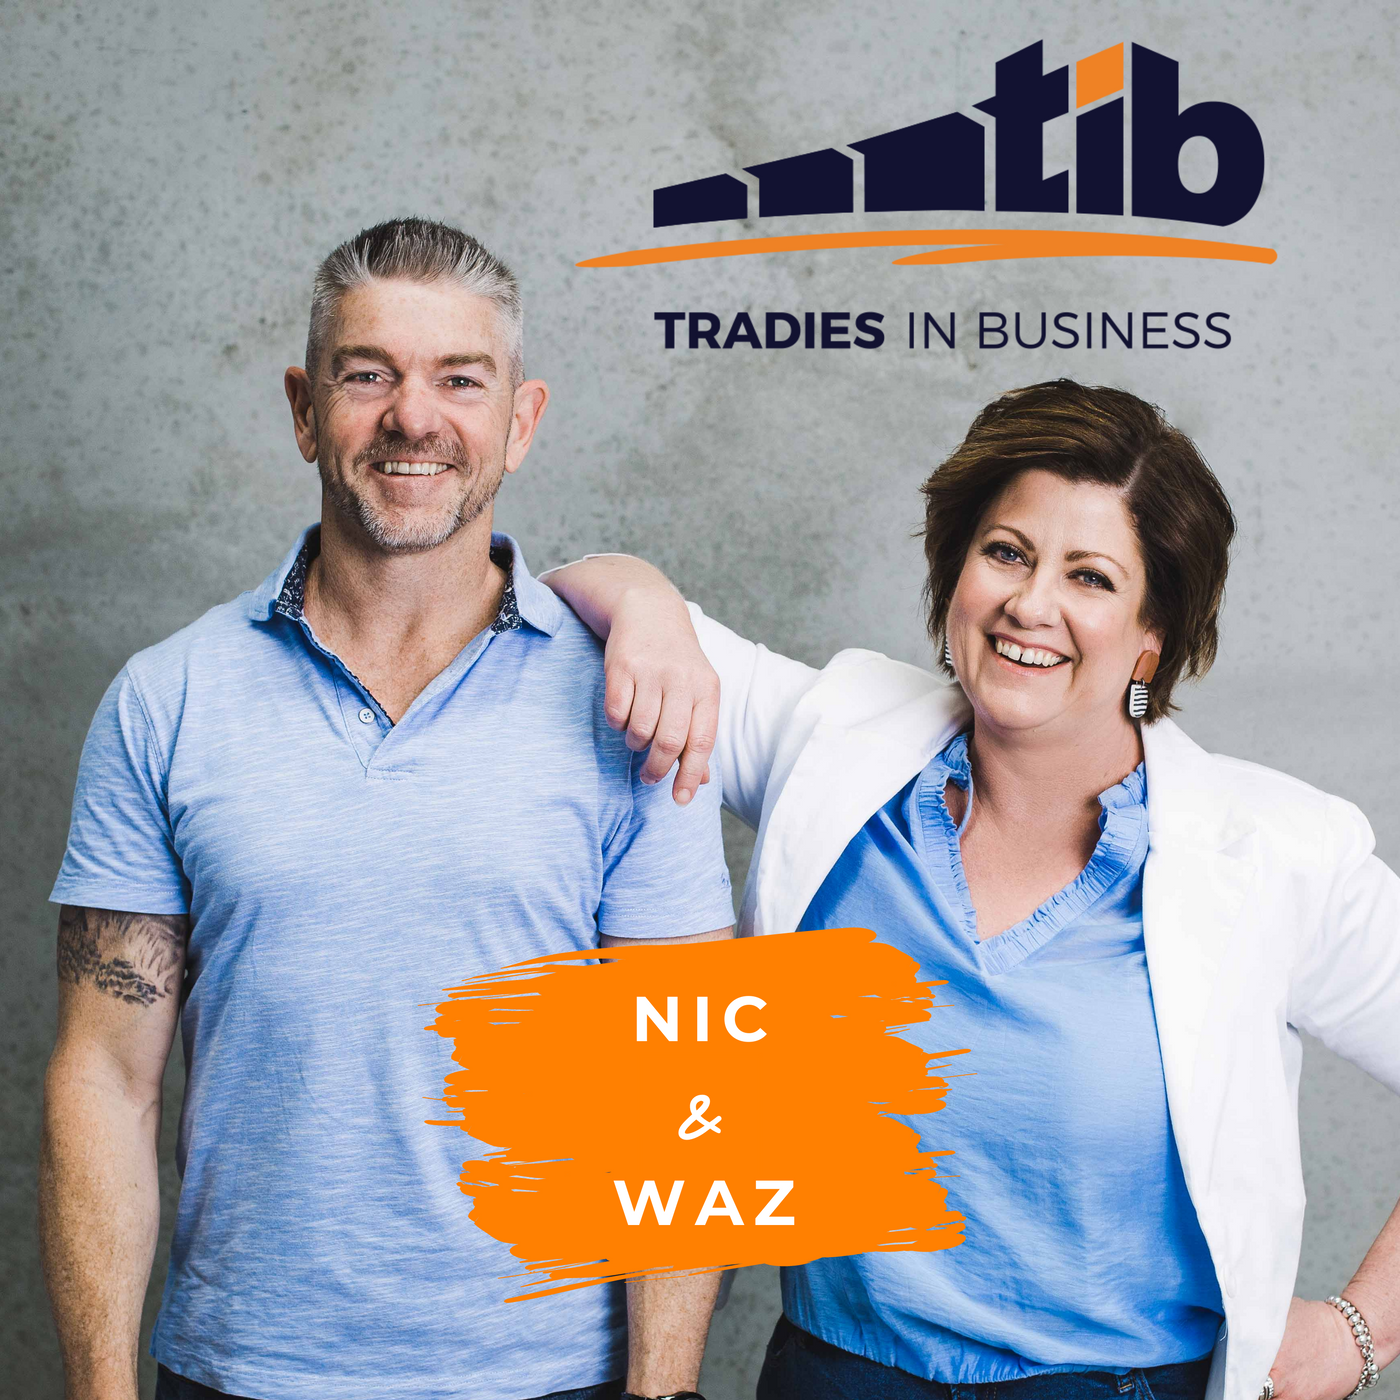 TIB595 Real Tradie Guys - Joel from Instyle Gardens on Winning Awards, TV Appearances and Passion In Business